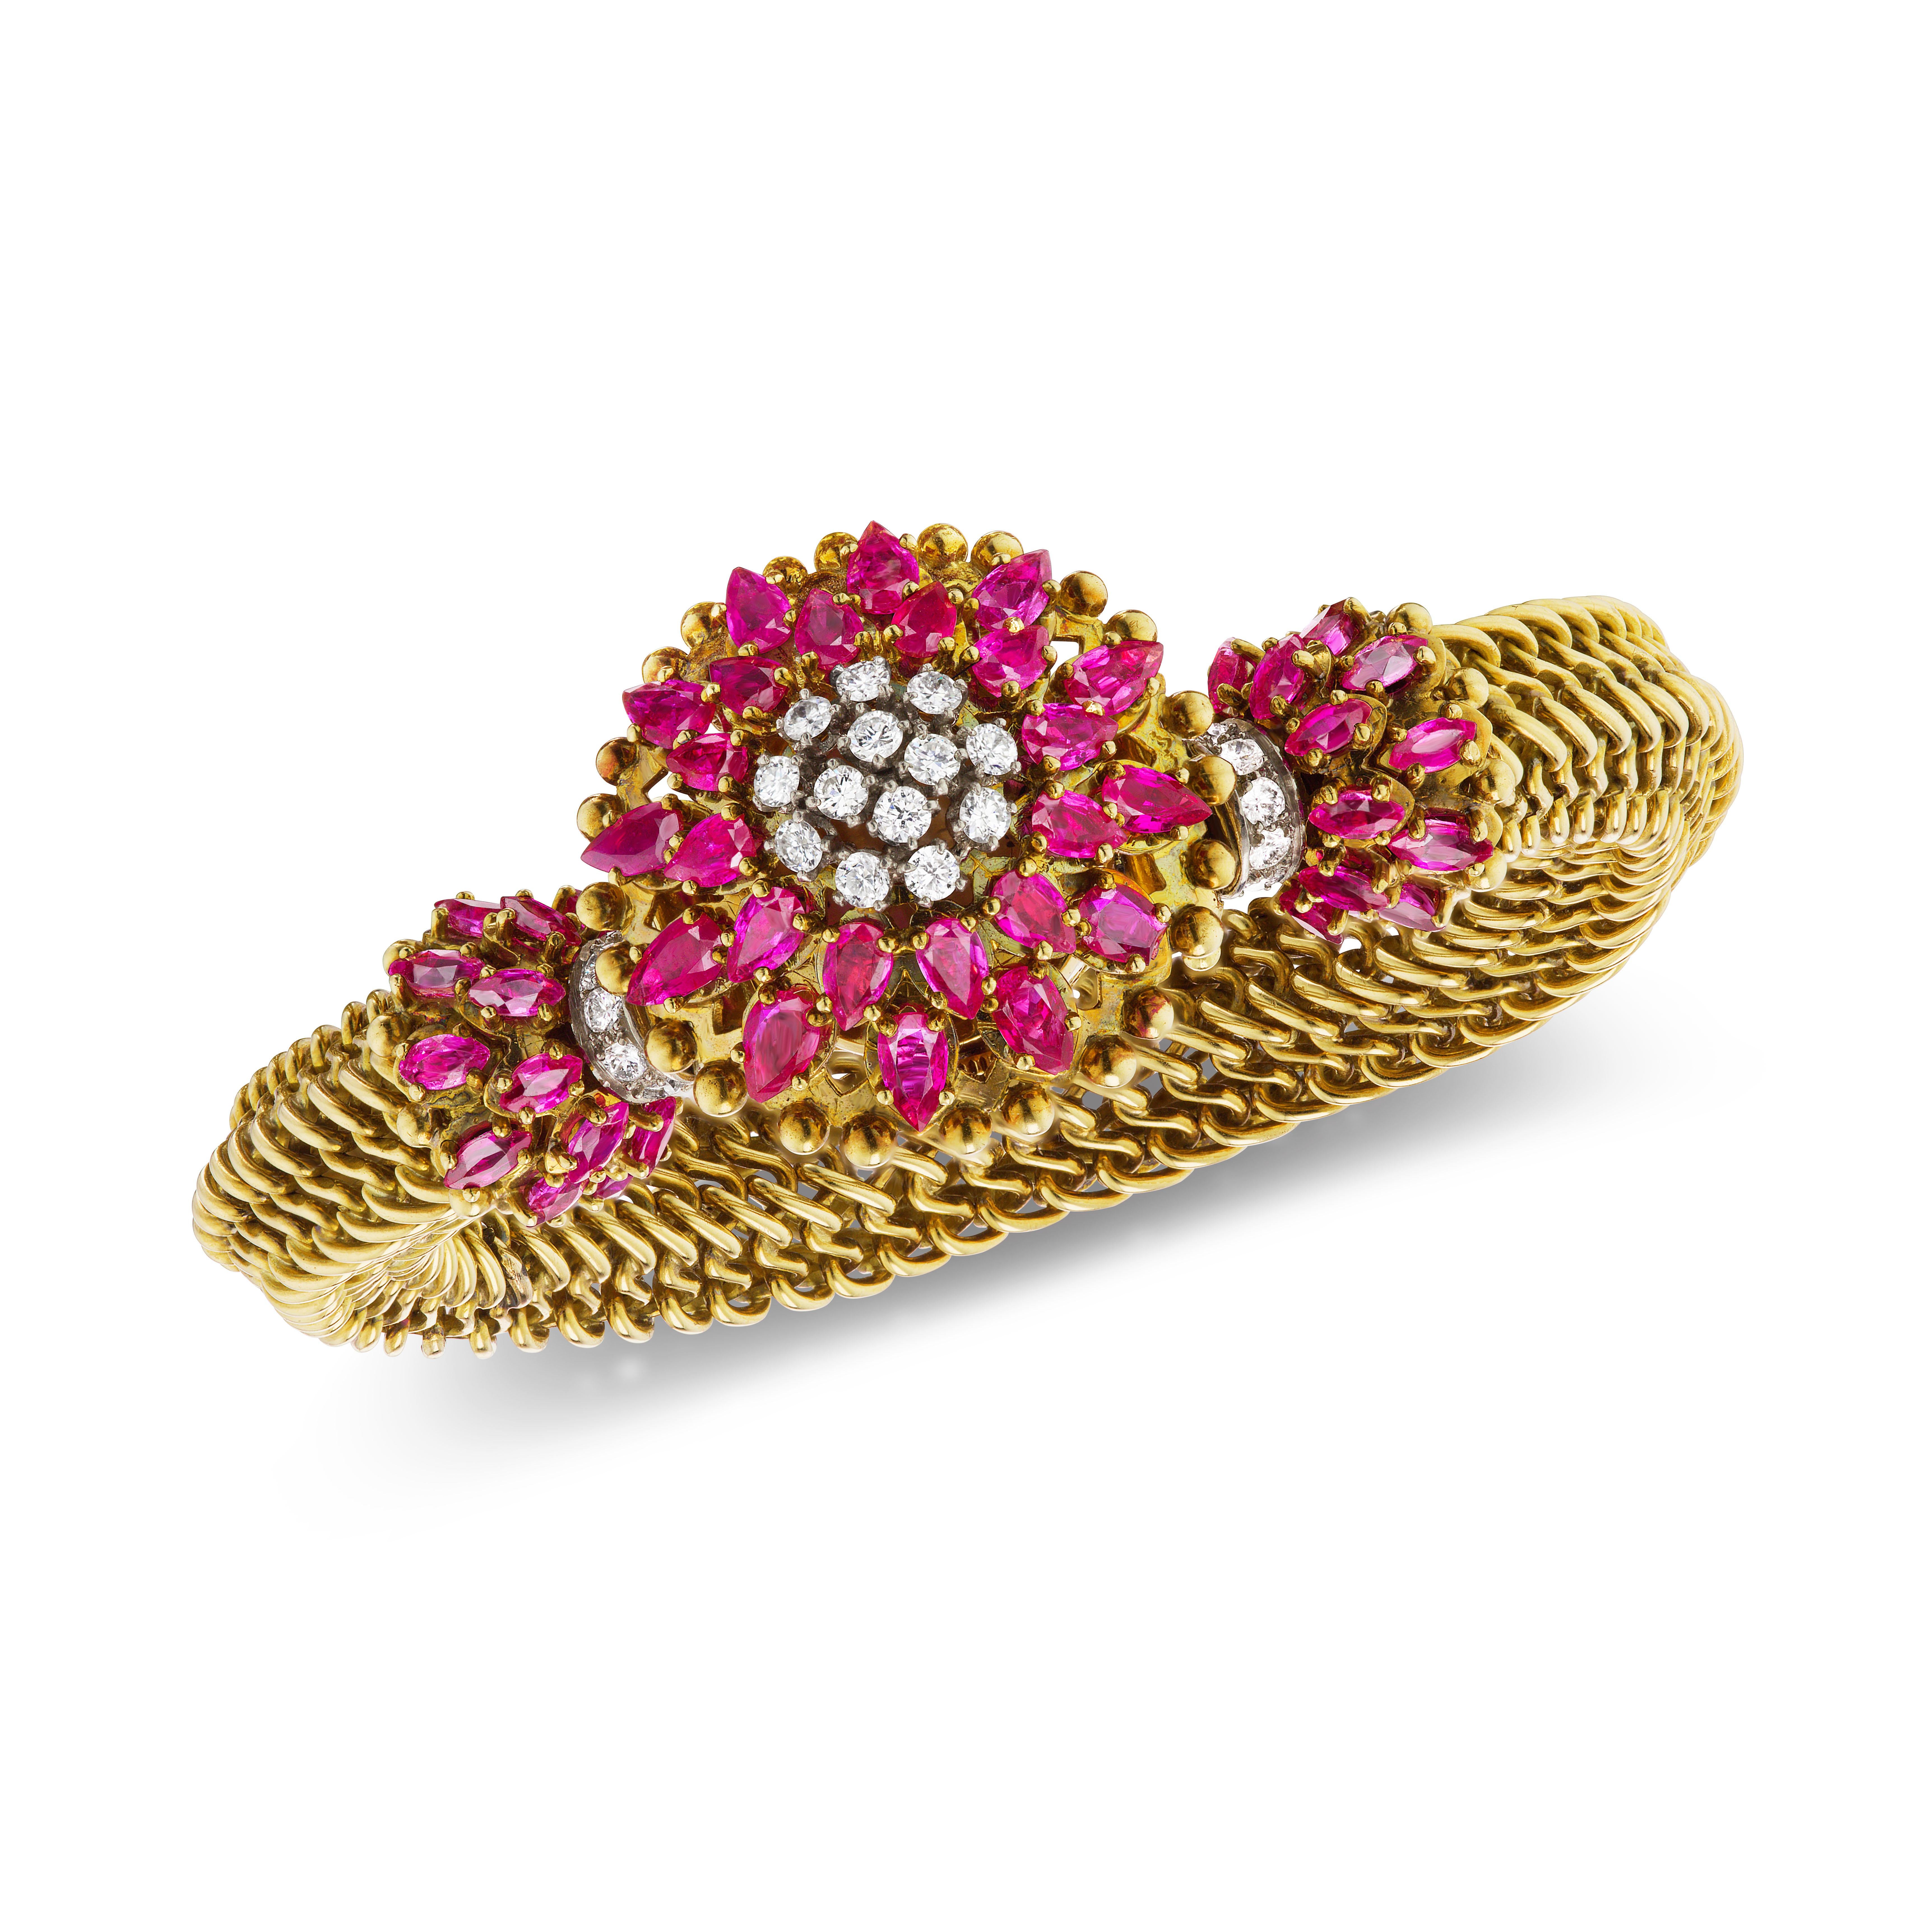 This fabulous 18 Karat gold chain mail vintage bracelet features a covered watch adorned with 24 pear-shape rubies of exceptional quality and 9 round brilliant diamonds. There are 26 additional oval rubies and 10 round brilliant diamonds mounted at